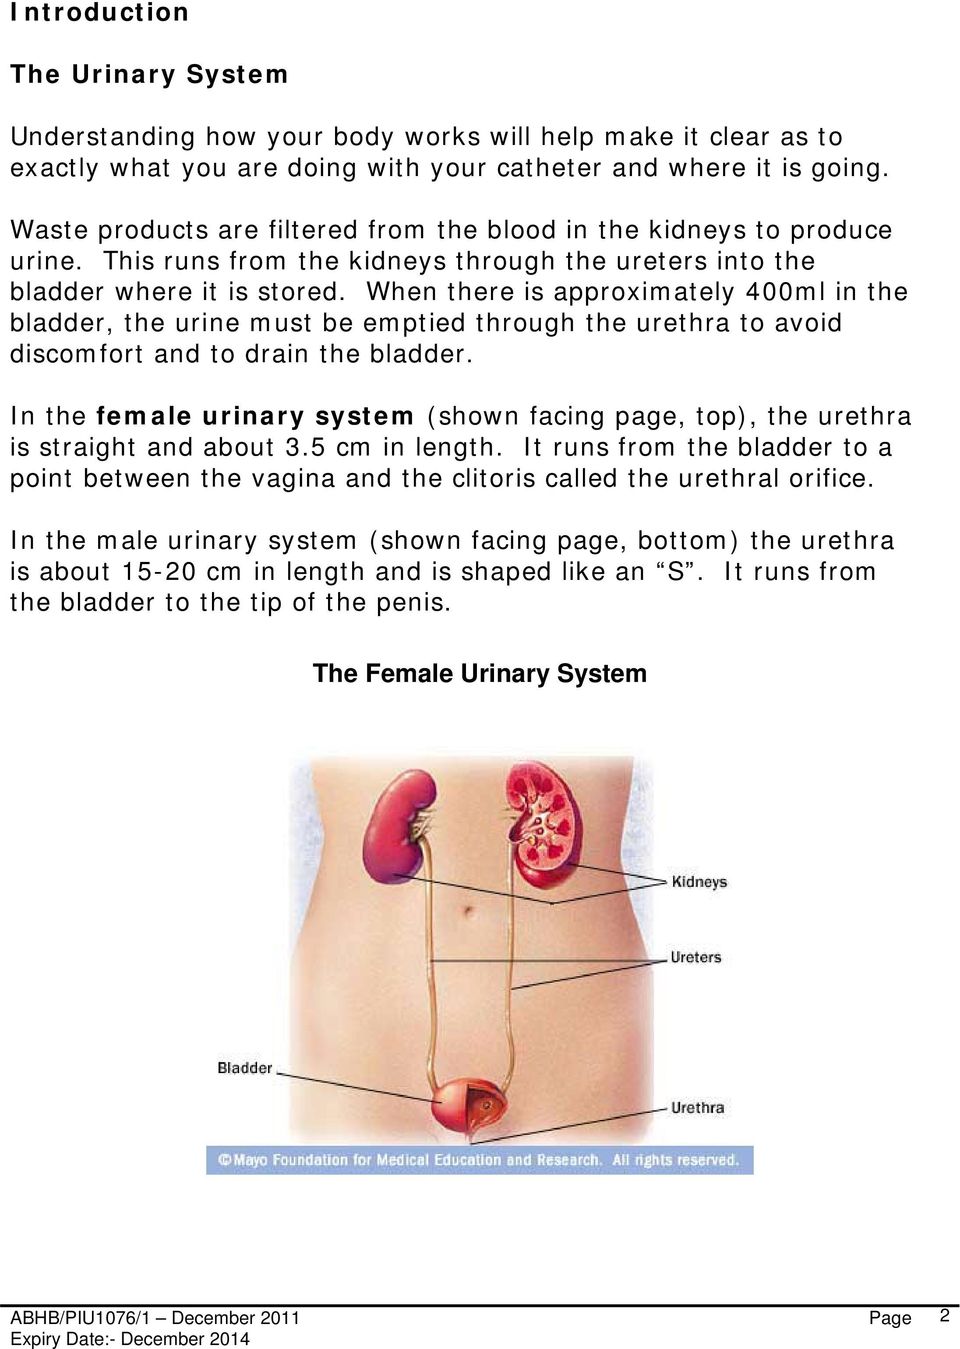 When there is approximately 400ml in the bladder, the urine must be emptied through the urethra to avoid discomfort and to drain the bladder.